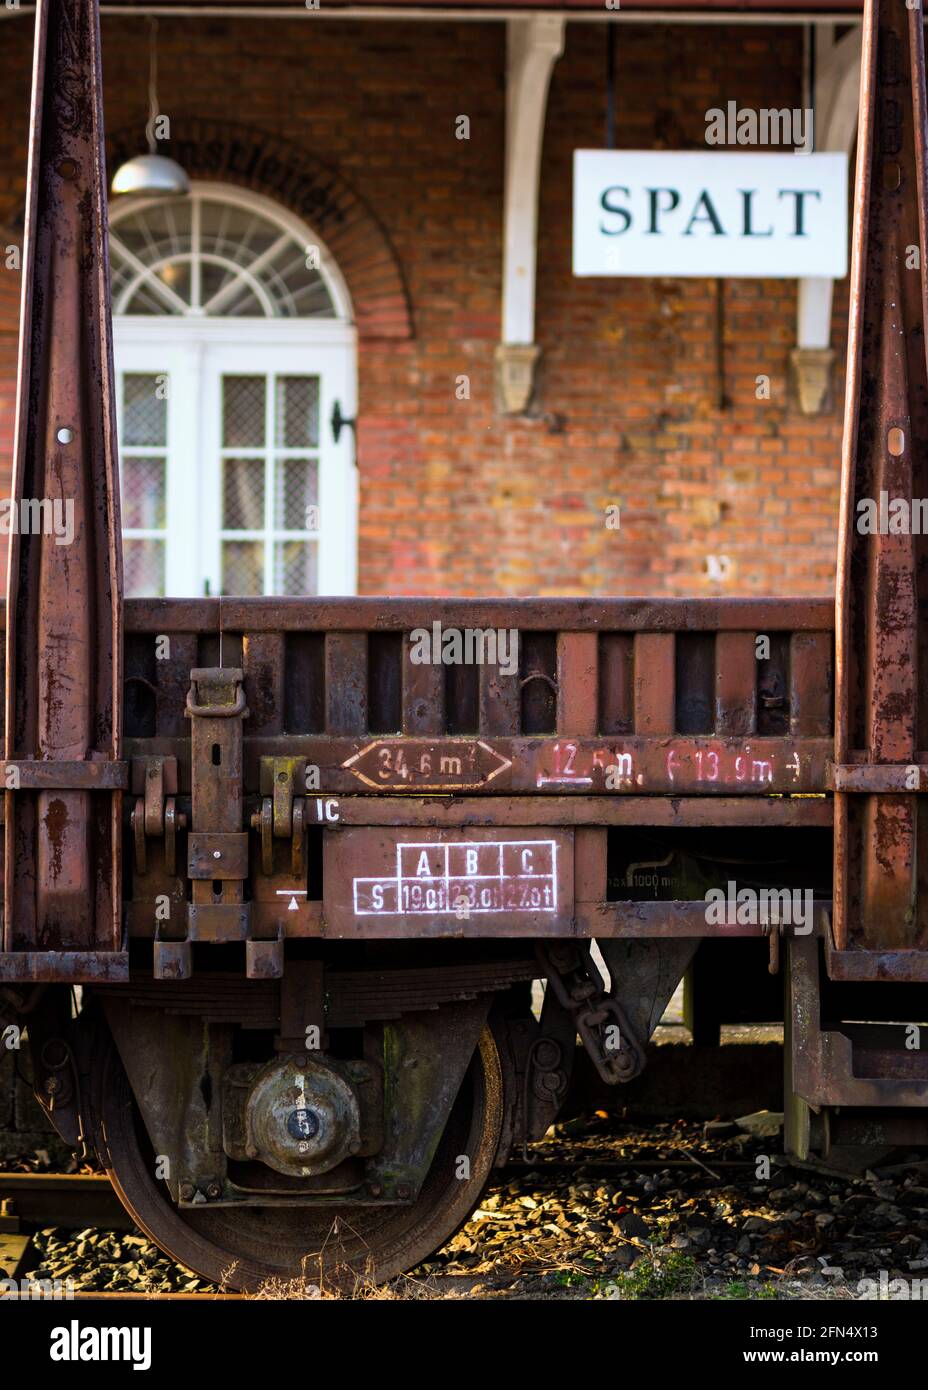 SPALT IN BAVARIA, GERMANY - May 07, 2021: In the foreground an old rusty goods wagon with white lettering. in the background a disused train station i Stock Photo